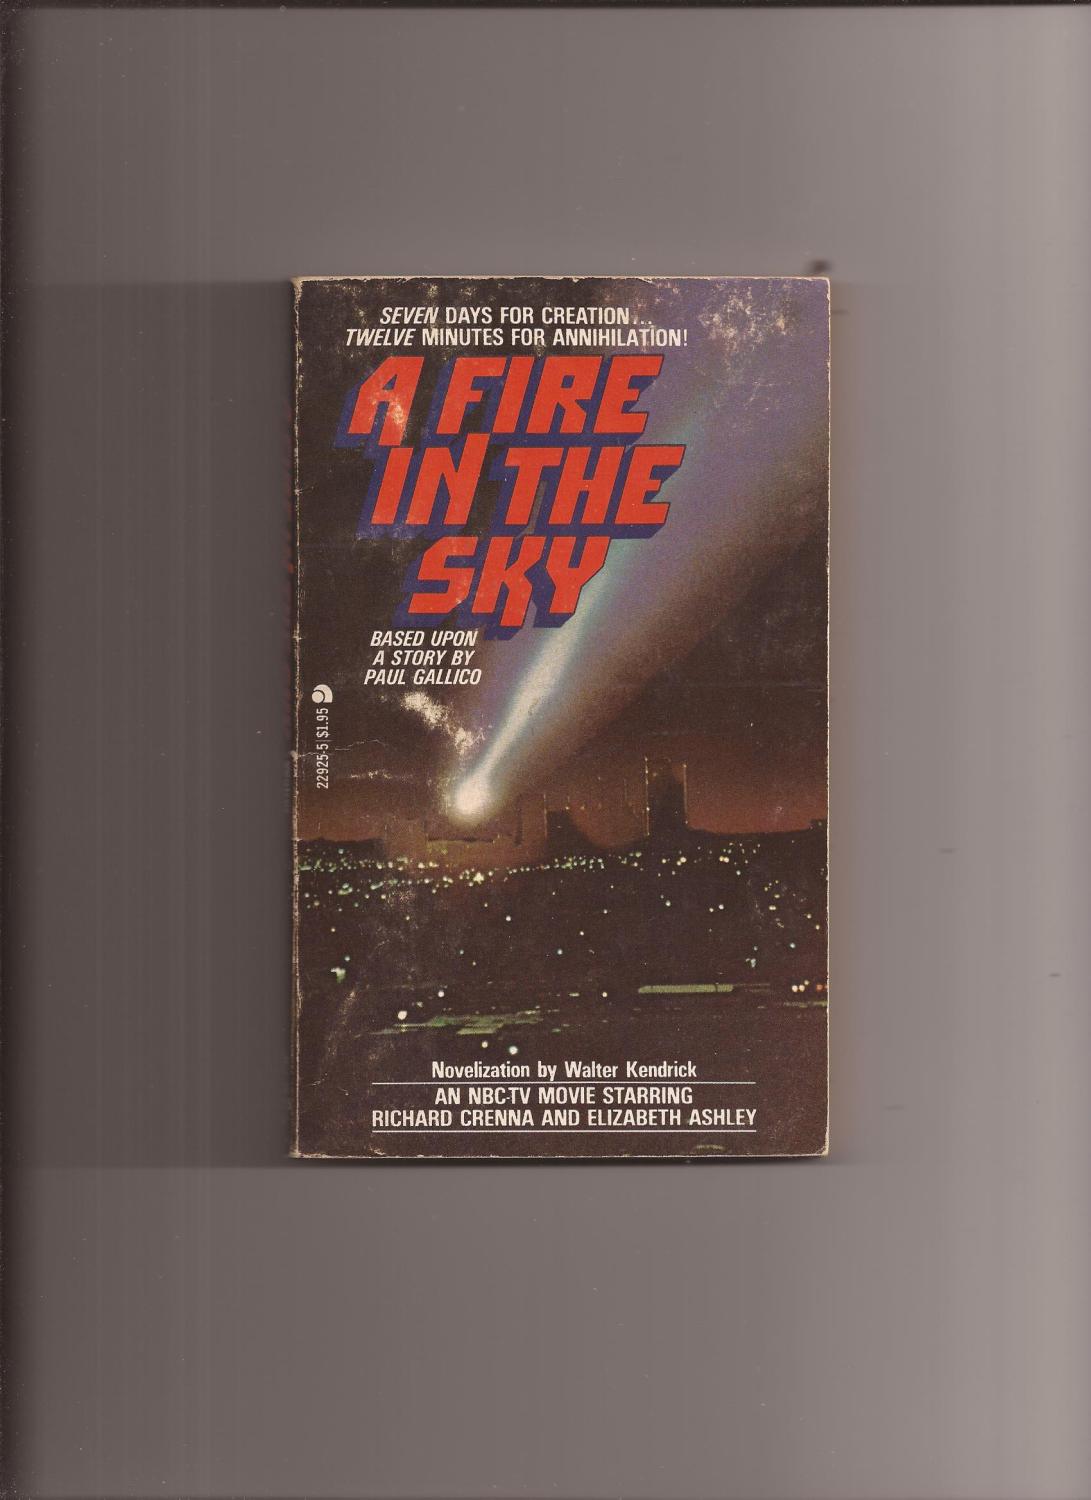 A Fire In The Sky (TV-Movie Tie-in) - Kendrick, Walter (based on a story by Paul Gallico and teleplay by Dennis Nemec and Michael Blankfort)